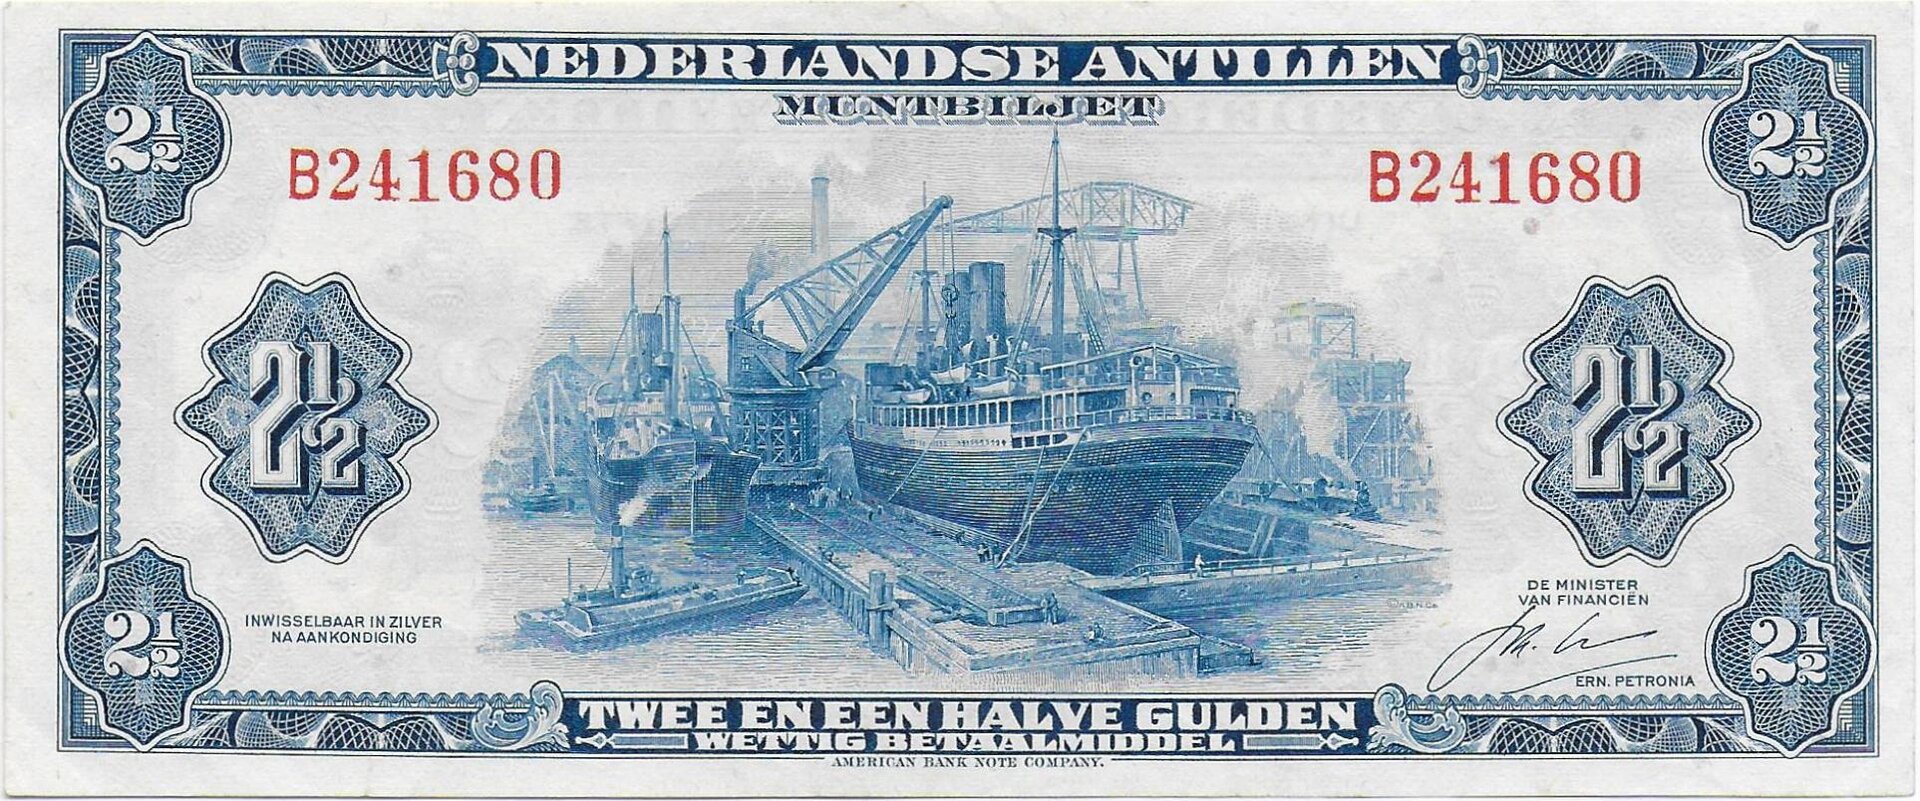 Netherlands Antilles Two and a Half Gulden 1964 P-41b  front.jpg